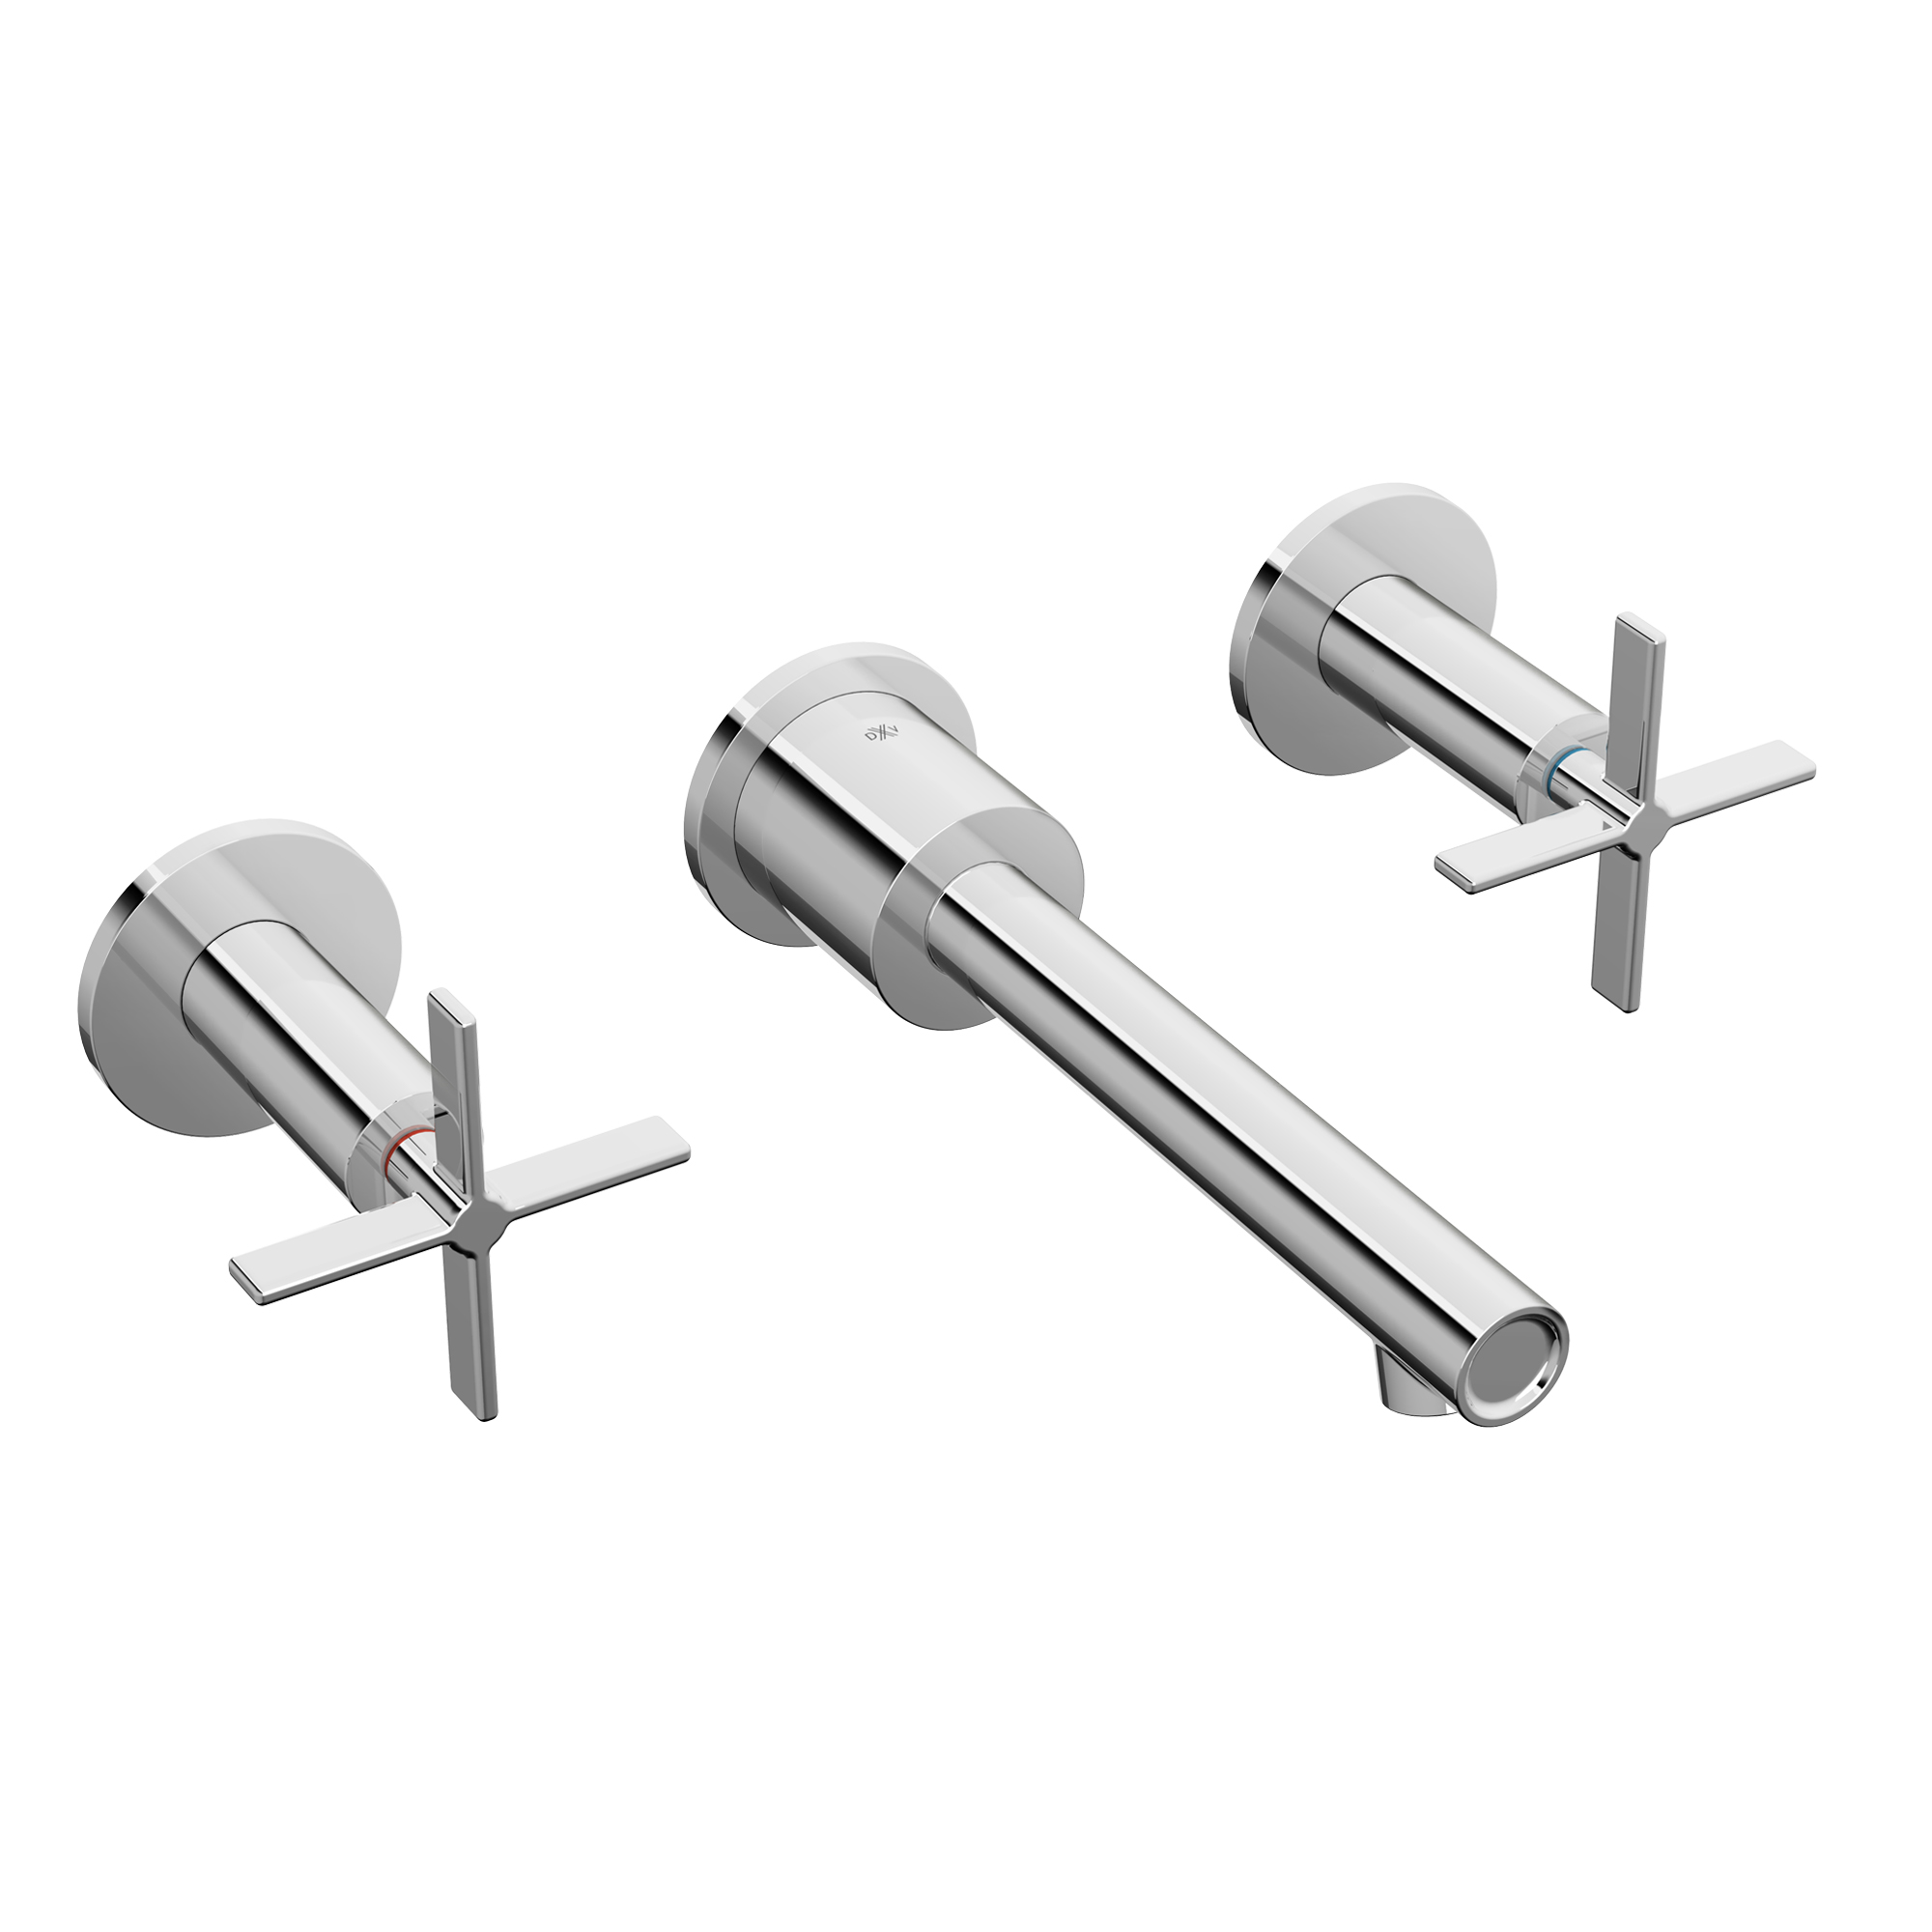 Percy® 2-Handle Wall Mounted Bathroom Faucet with Indicator Markings and Cross Handles